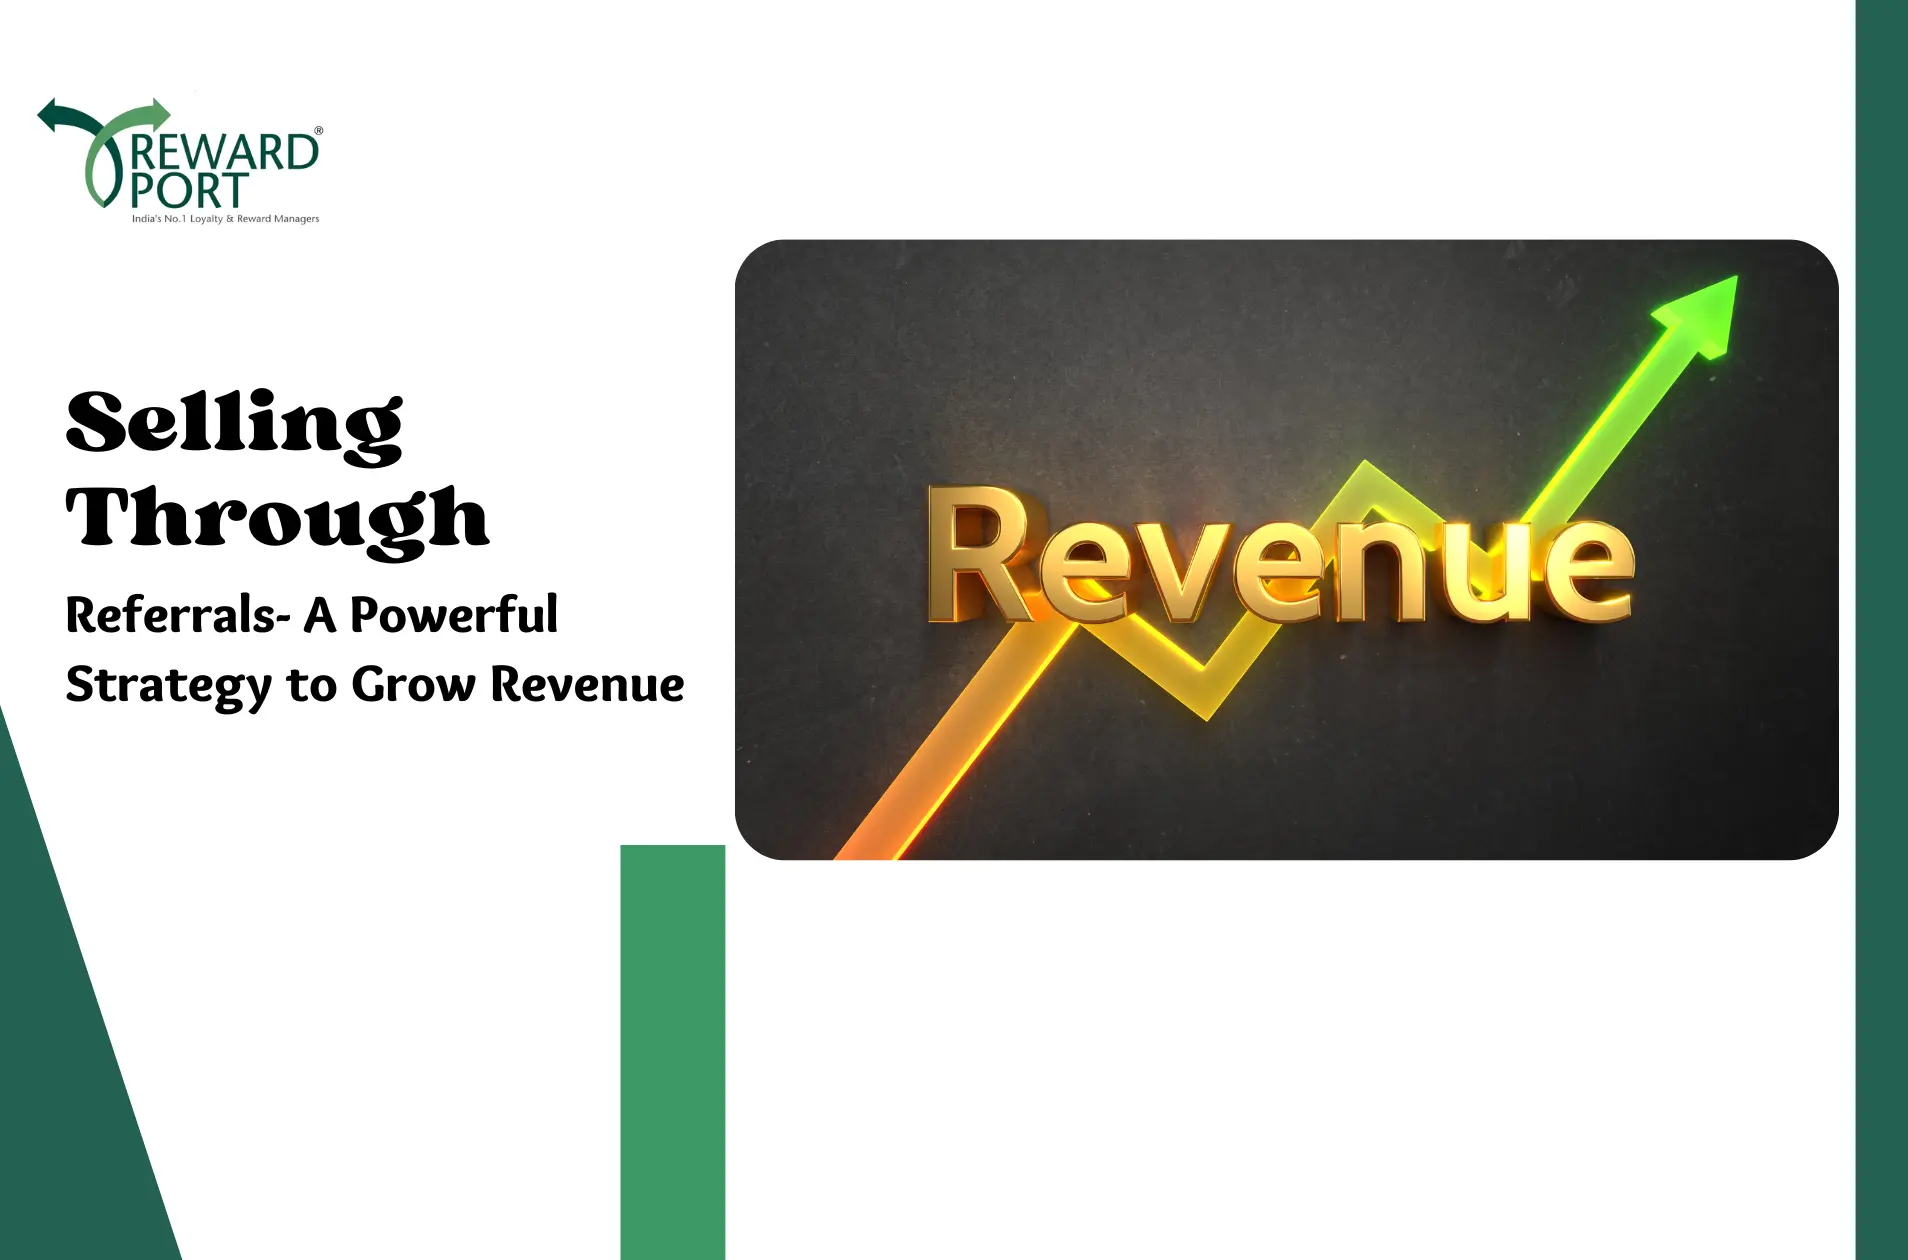 Selling Through Referrals- A Powerful Strategy to Grow Revenue